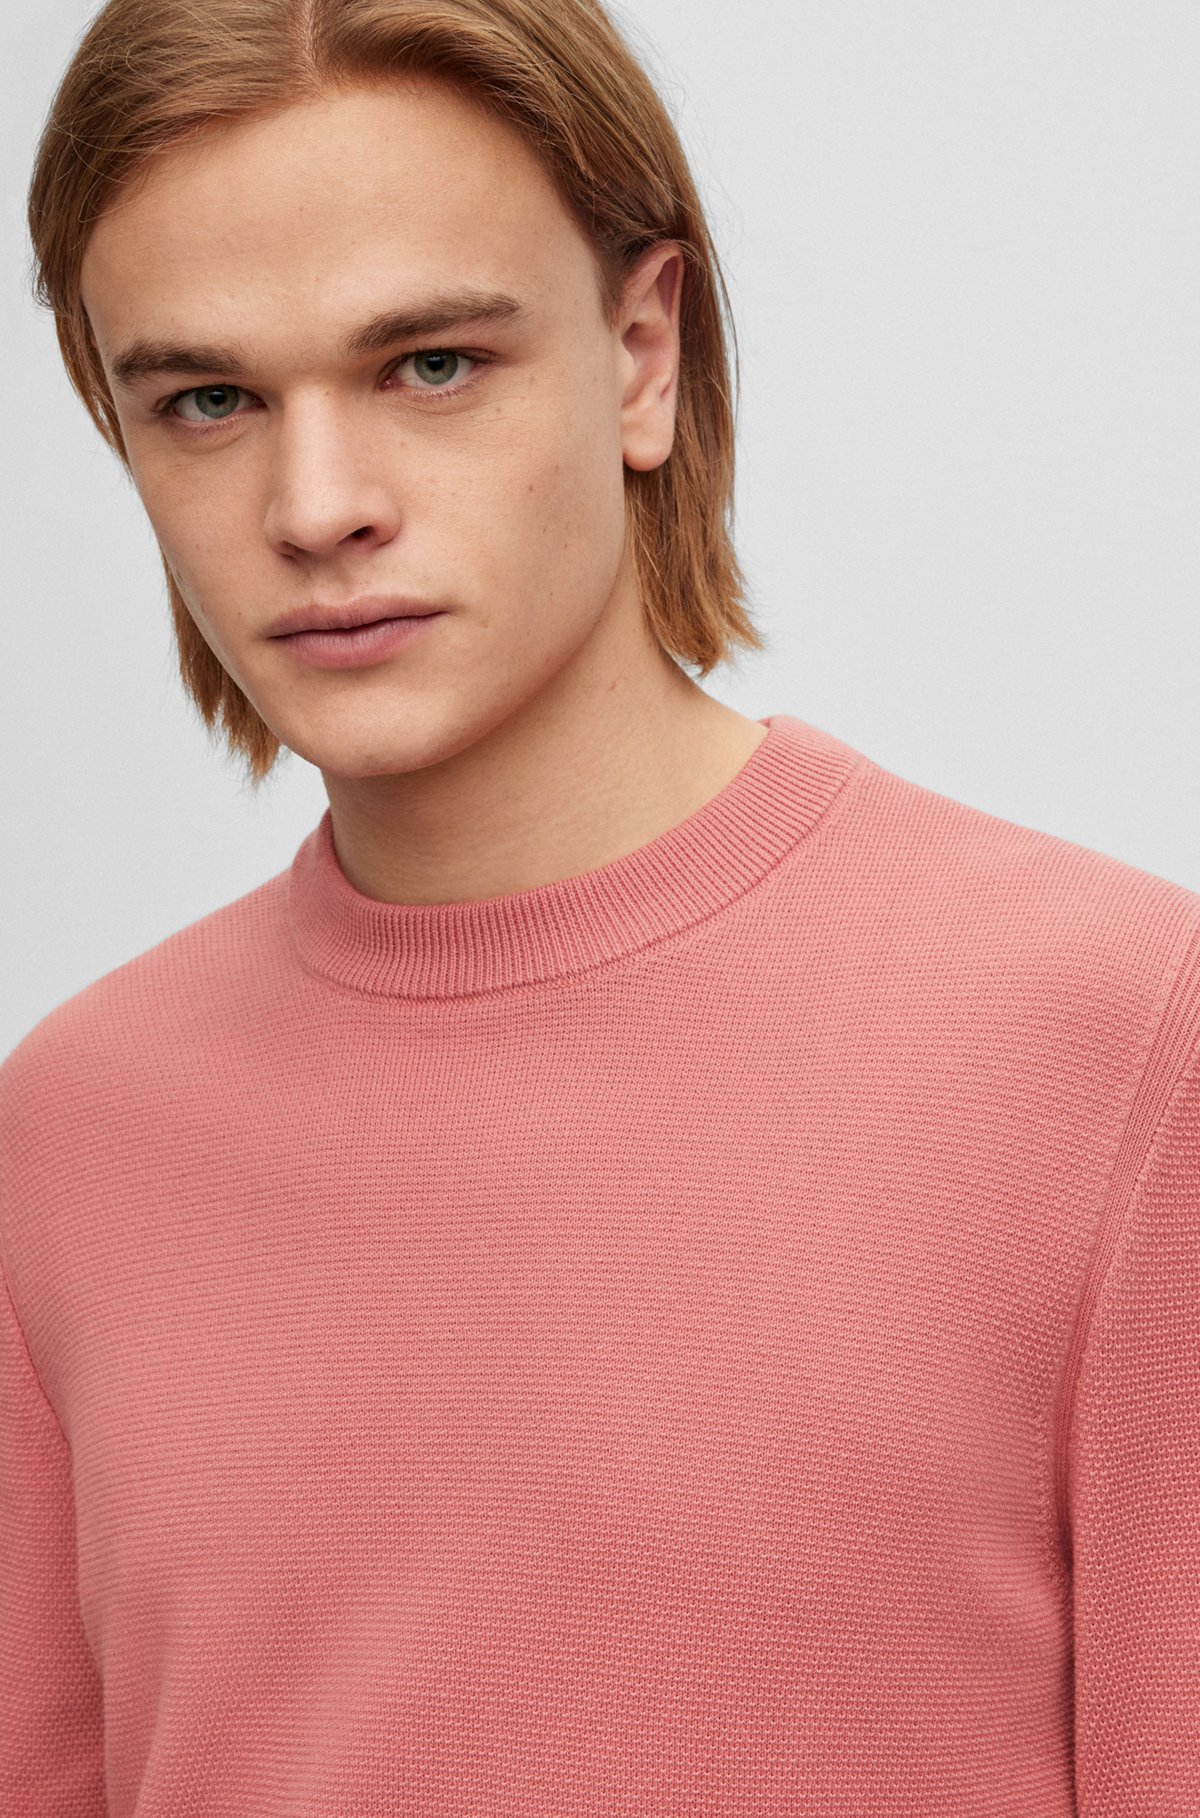 Crew-neck sweater in structured cotton with stripe details, light pink